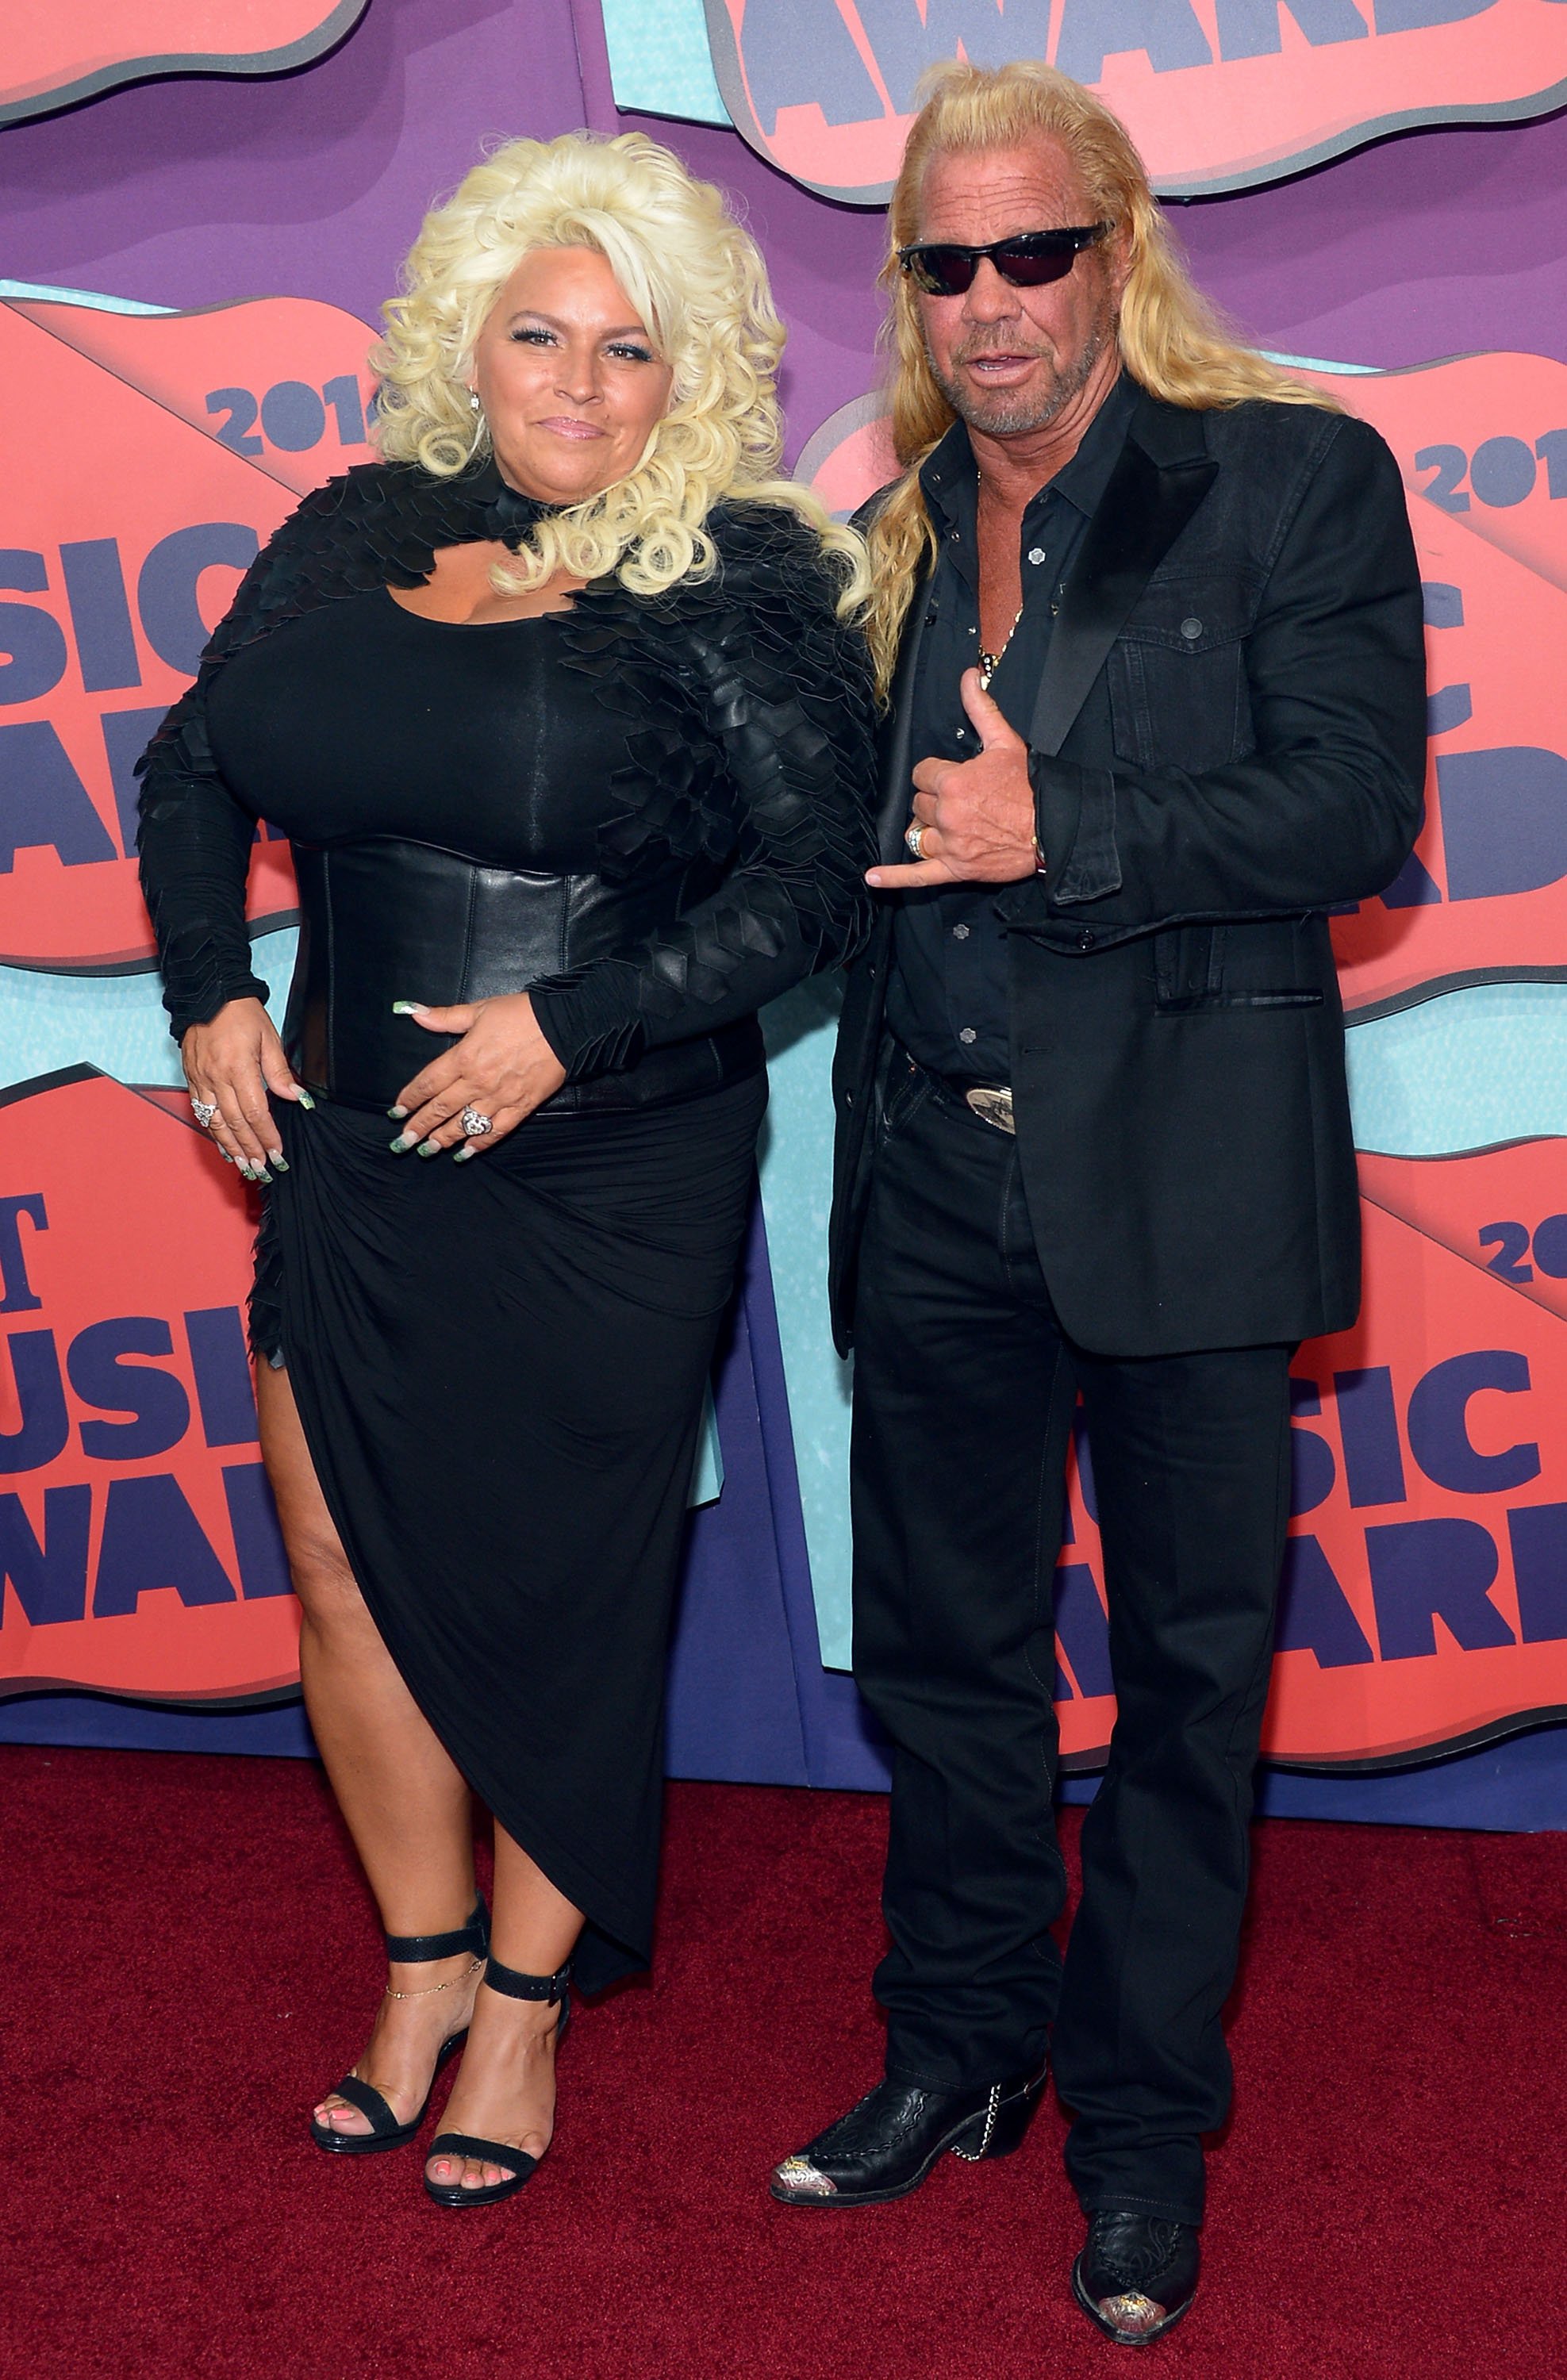 Beth Chapman and Duane Chapman attend the 2014 CMT Music awards at the Bridgestone Arena on June 4, 2014 in Nashville, Tennessee.| Source : Getty Images